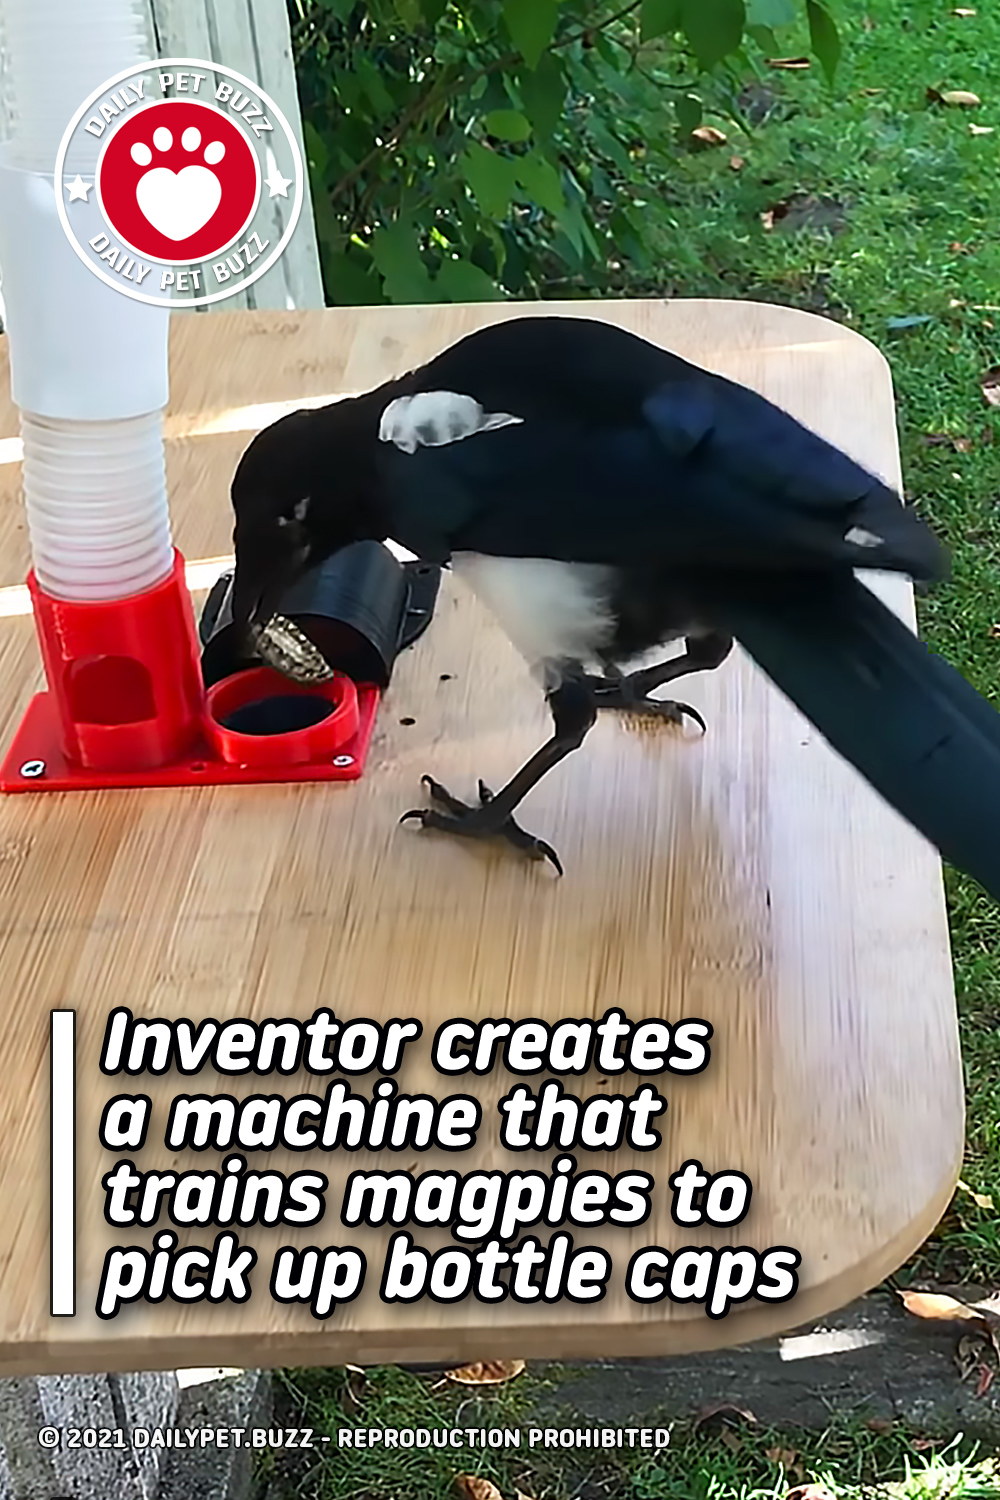 Inventor creates a machine that trains magpies to pick up bottle caps